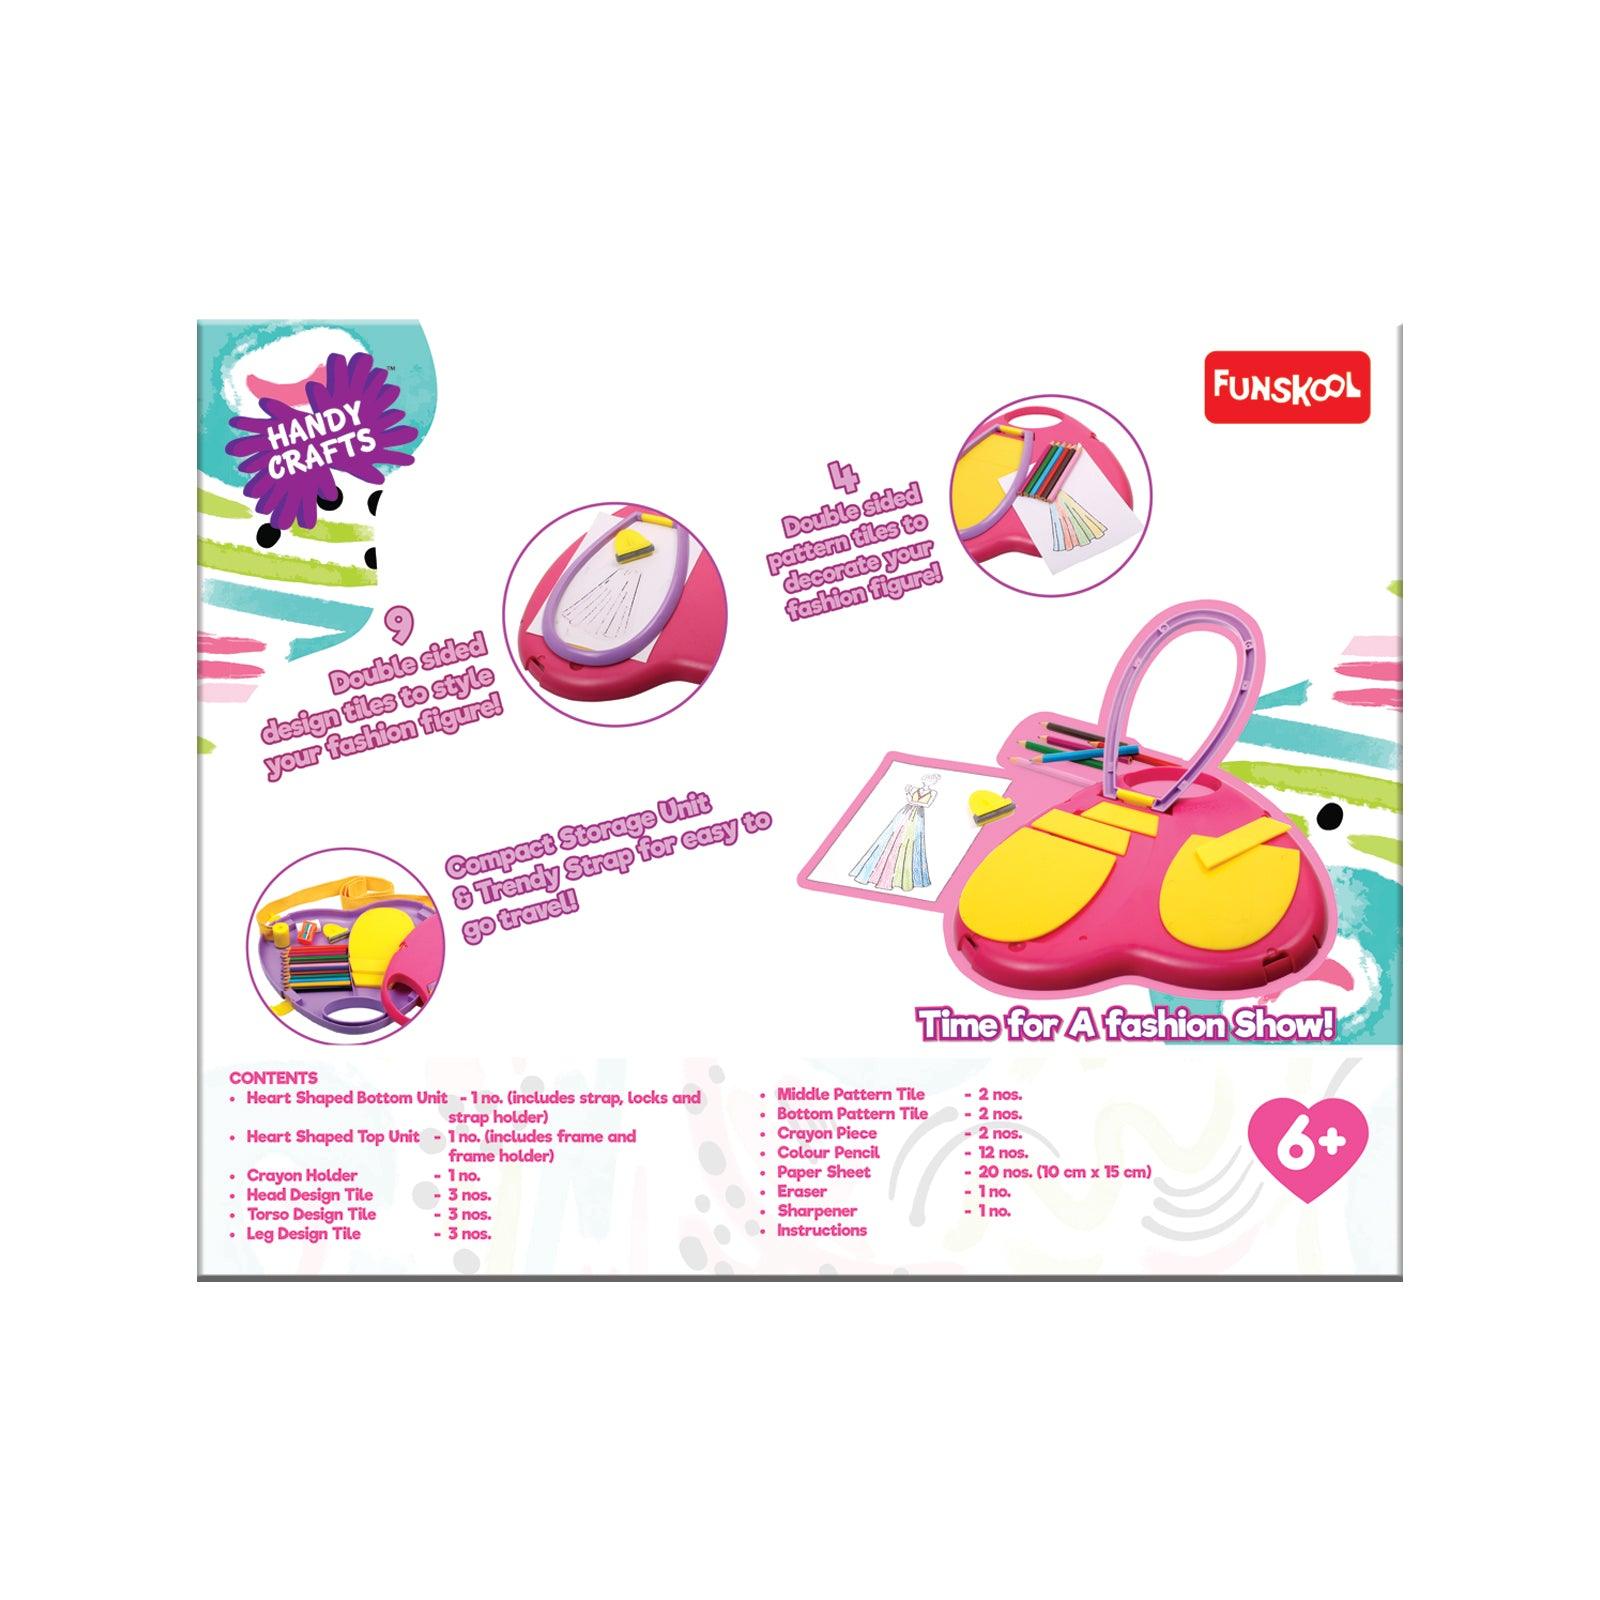 Funskool Handycrafts Heart of Fashion - Fashion Designing Kit for Ages 6+ - FunCorp India